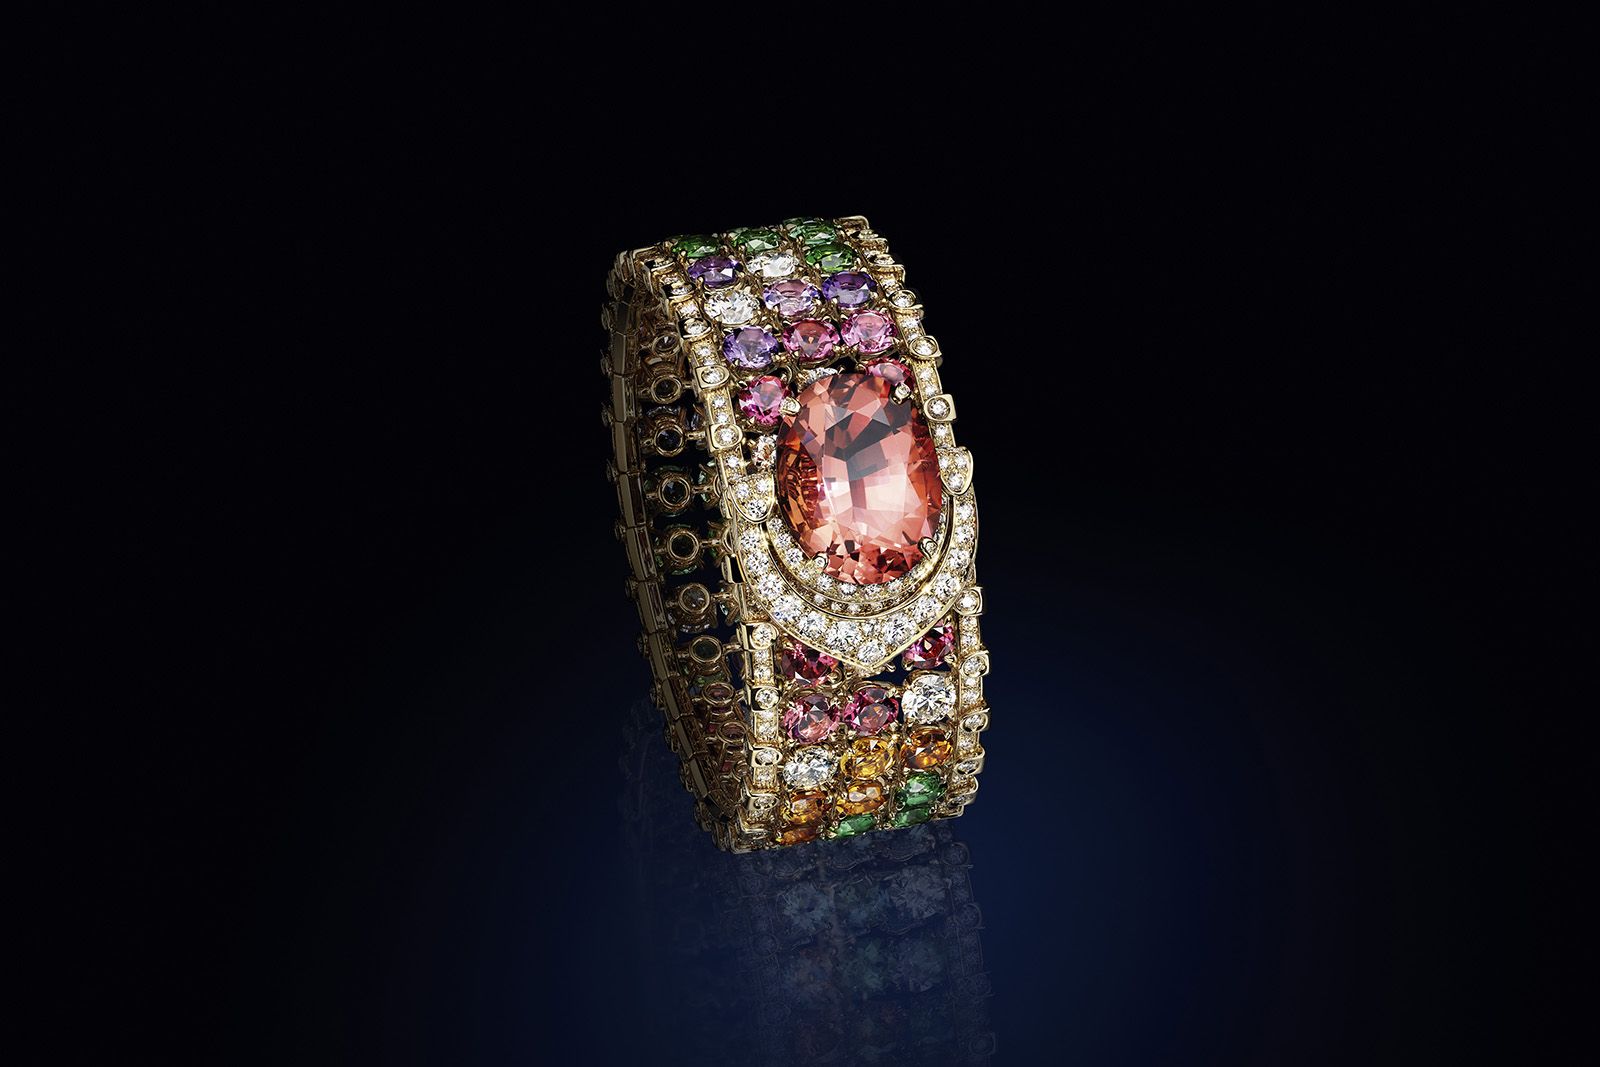 Louis Vuitton Bravery II High Jewellery Multipin bracelet in yellow gold with a 20.67 carat oval-cut pink tourmaline, an assortment of coloured stones (tourmalines, citrines, peridots, amethysts, aquamarines, iolites, garnets, tanzanites) for 39.84 carats and 472 brilliant-cut diamonds for 7.41 carats